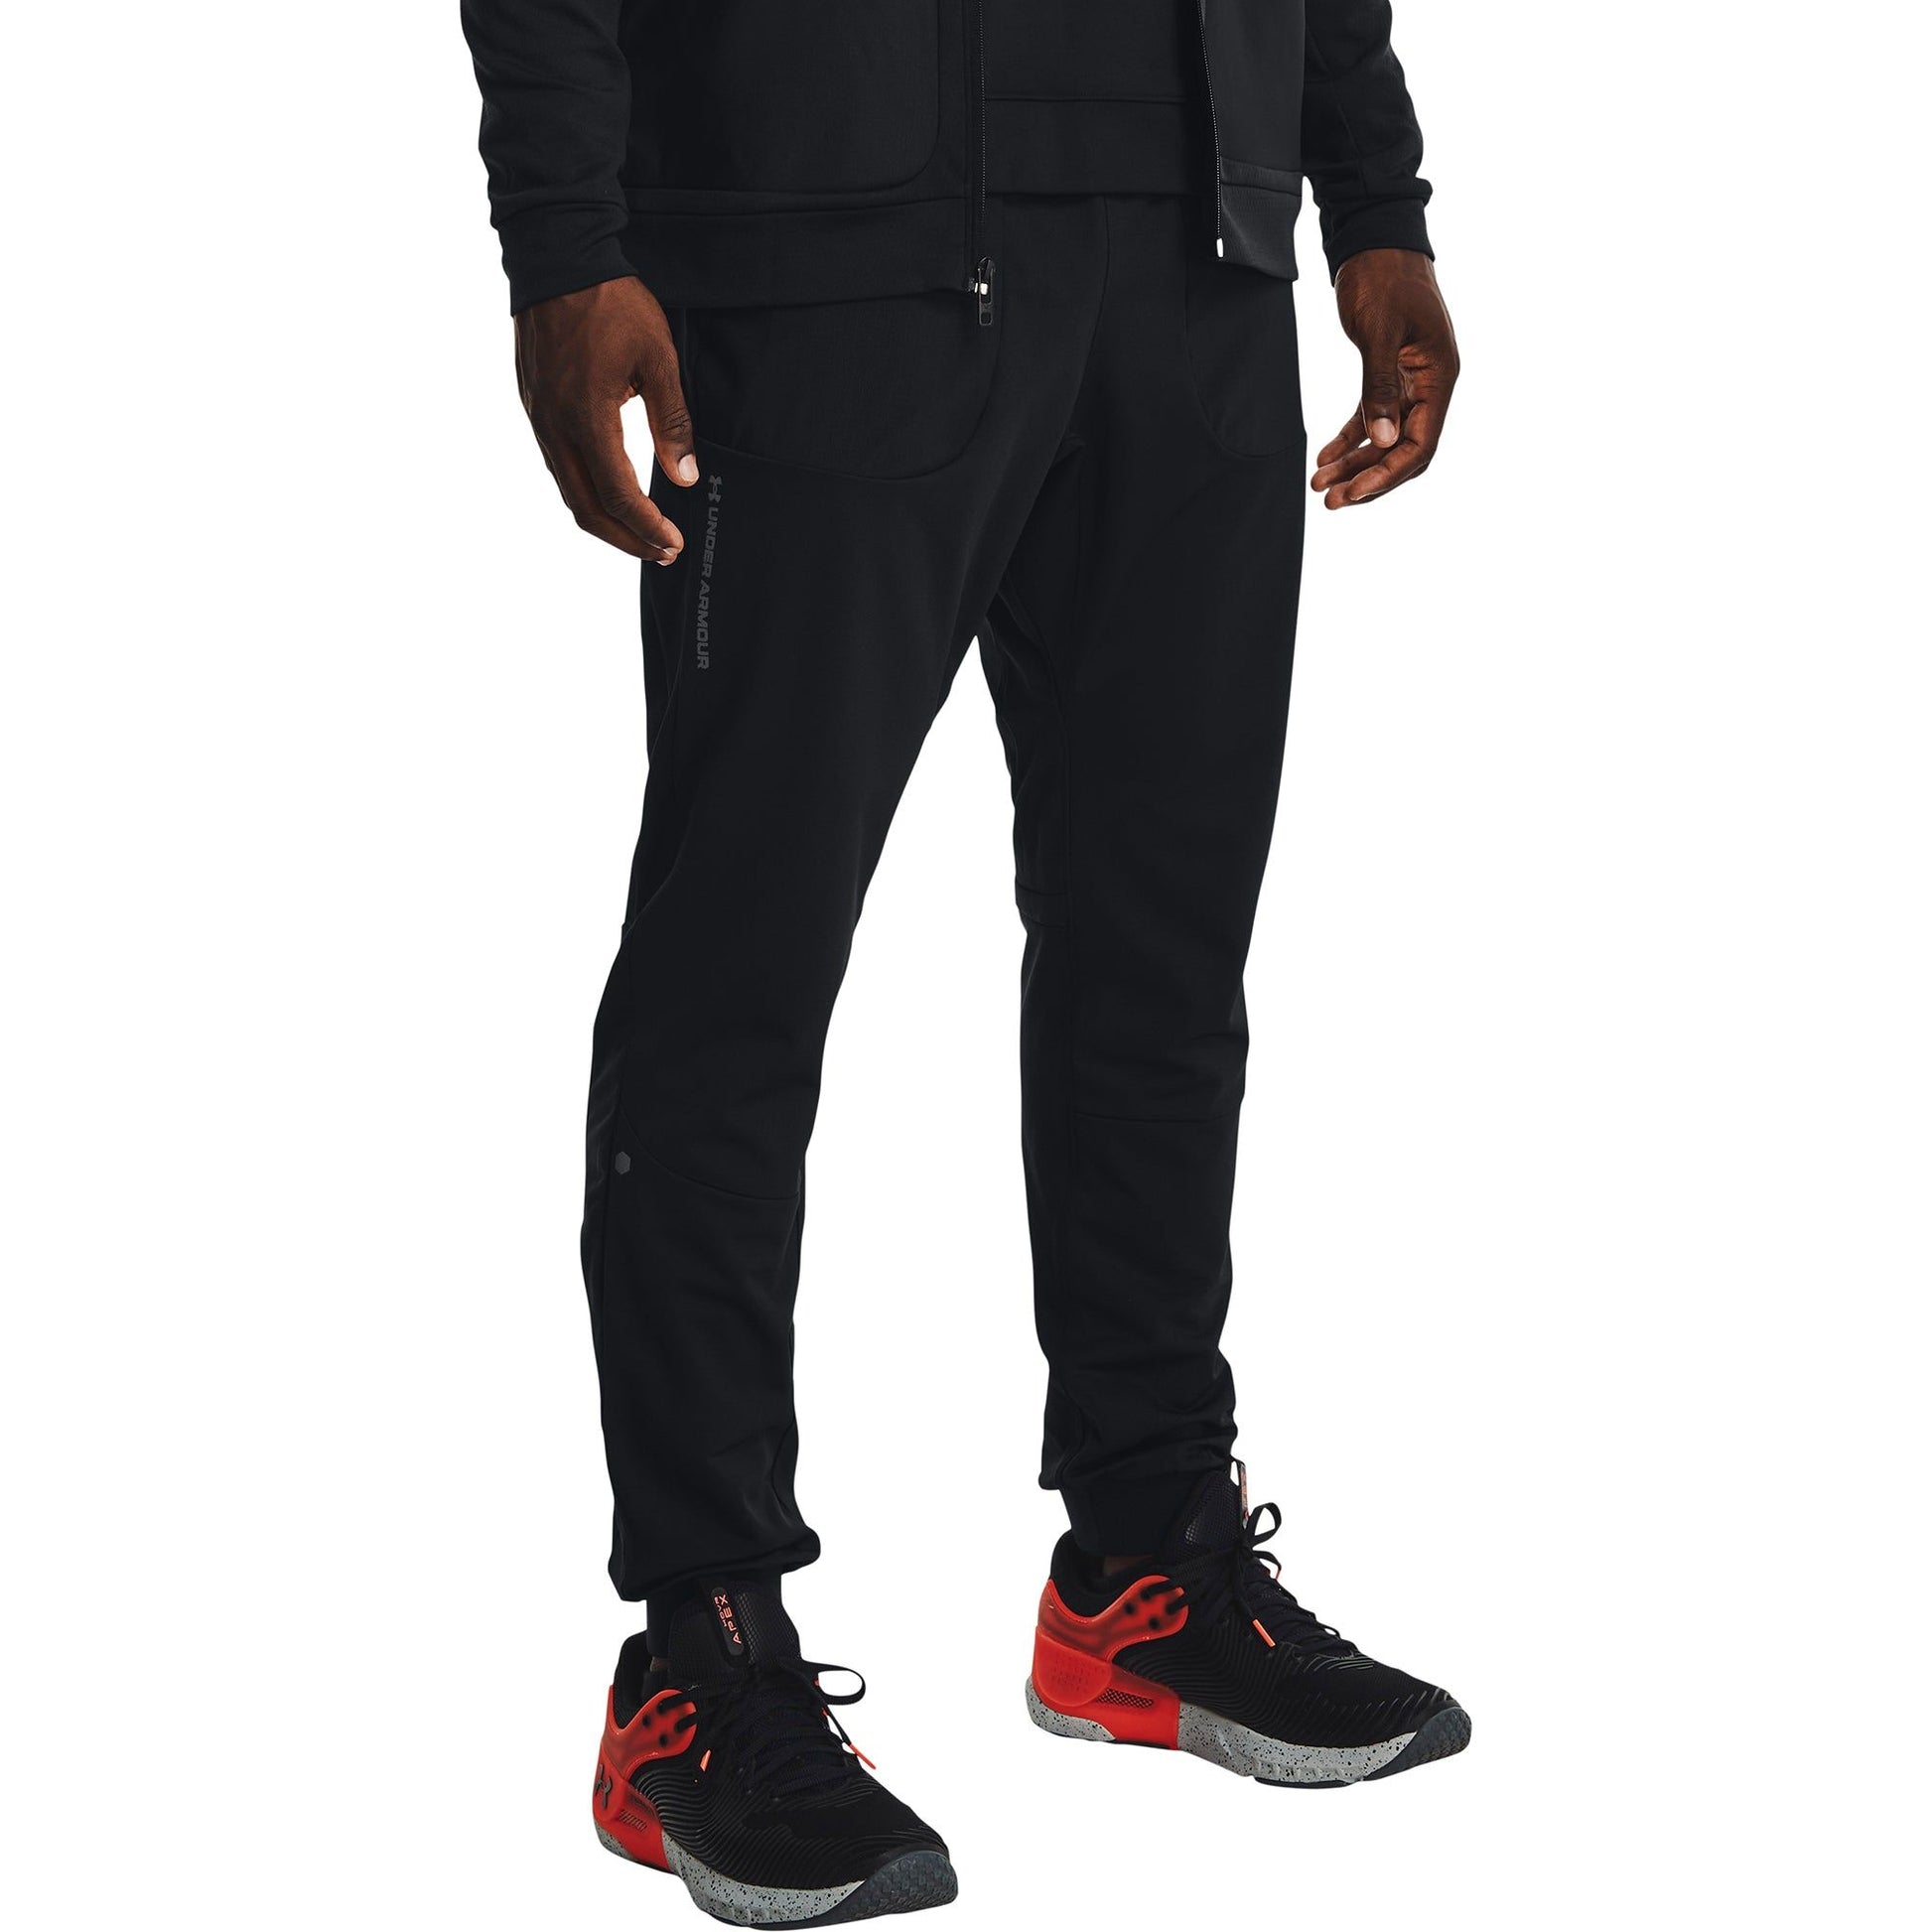 Under Armour Rush Warm Up Pants